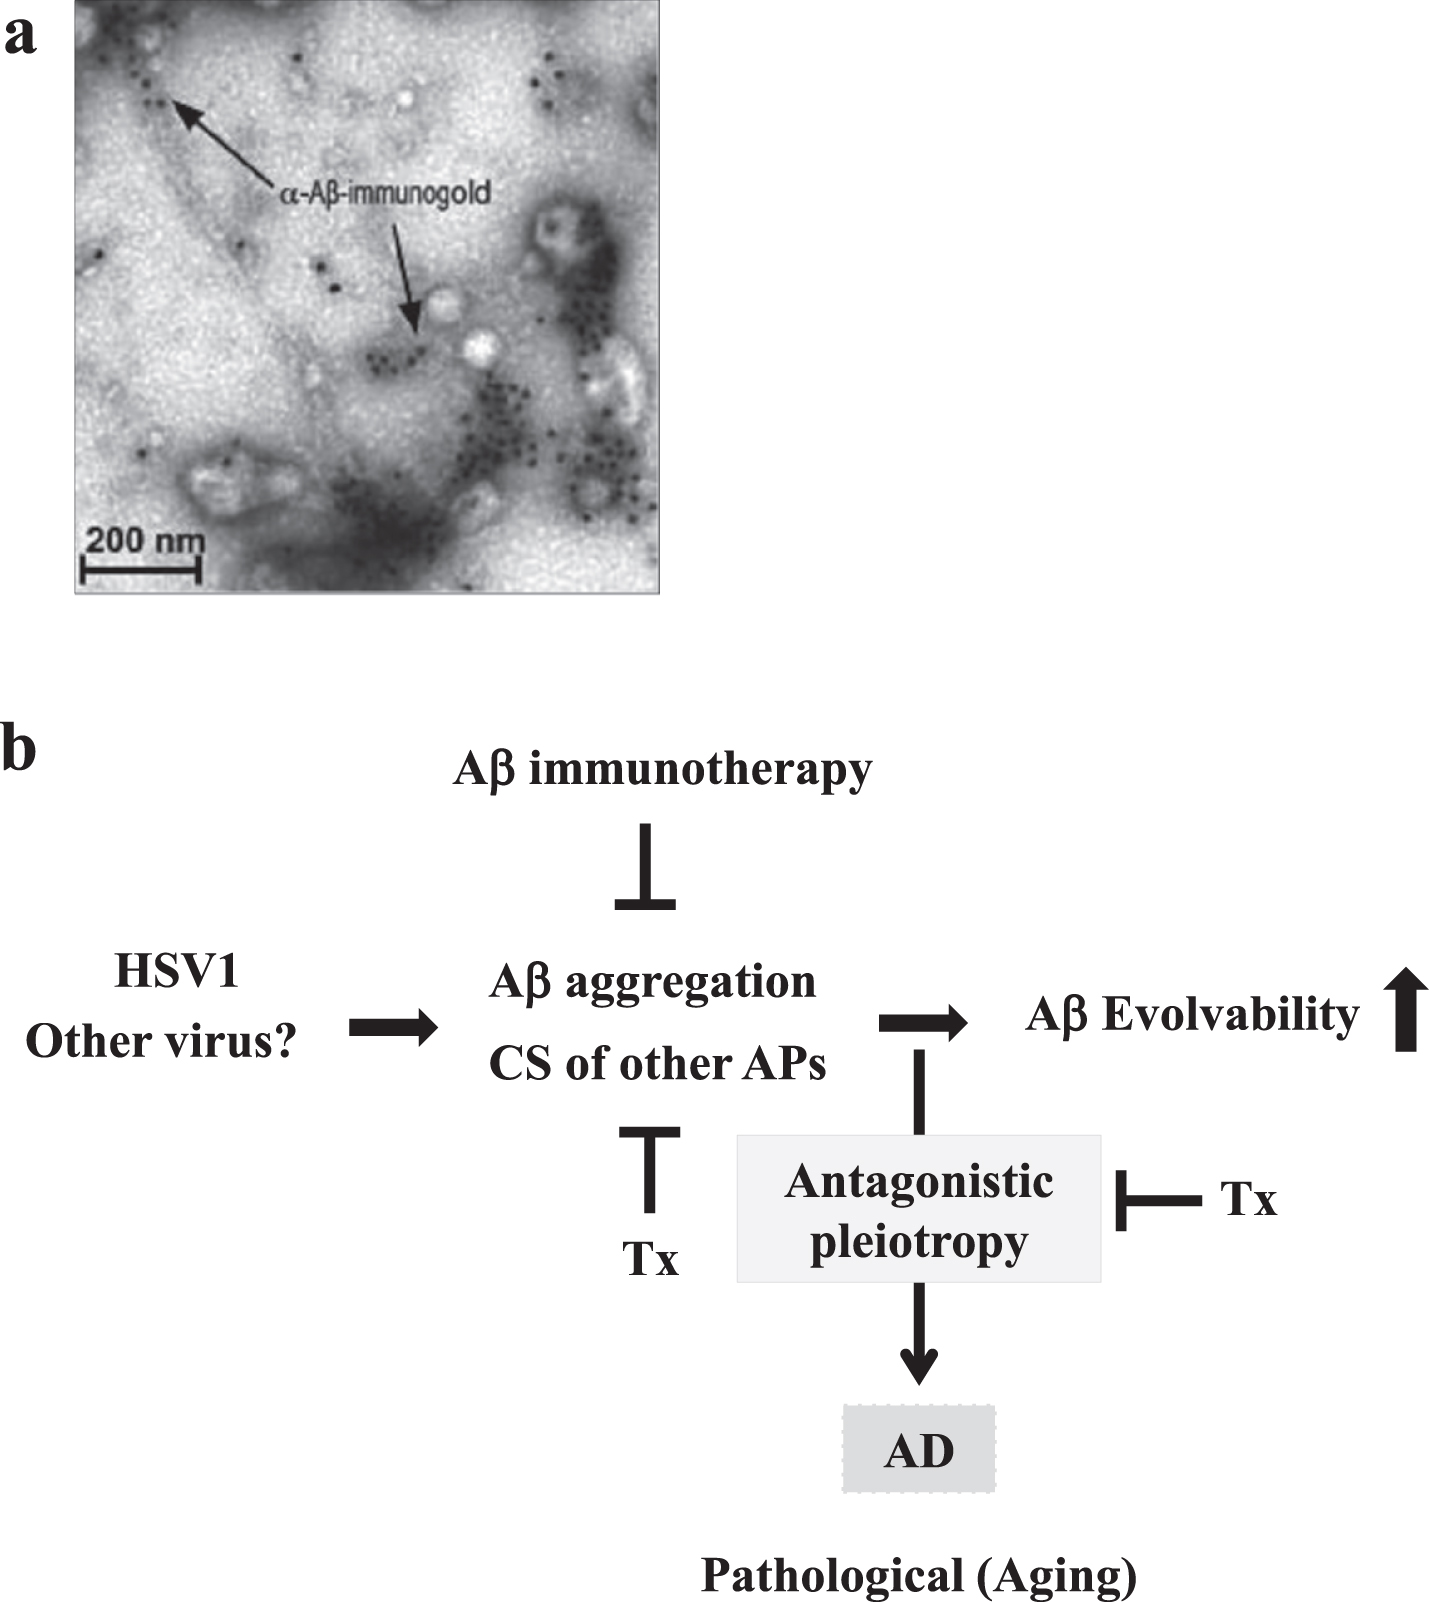 Seeding of Aβ fibrils by HSV1 infection. a) Ultrstractural analysis of immunoelectron micrography shows Aβ fibrillization seeded by HSV1 in cell culture leading to virus capture and entrapment. Please see the experimental conditions in Eimer et al. (2018) [45]. Reprinted from Eimer et al. (2018) [45] with permission. b) Schematic of Aβ evolvability of and disease manifestation related to HSV1 infection. Aβ evolvability might be an epigenetic phenomenon transmitted transgenerationally to confer resistance against the HSV1 infection in offspring during reproduction, which may be beneficial in evolution. However, evolvability might lead to T2DM during parental aging through the antagonistic pleiotropy mechanism. The Aβ evolvability is increased by various causes, such as the CS of APs, may result in an efficient delivery of information of stresses associated with the HSV1 infection for offspring, but increased frequency of AD in parents aging. The CS of APs and the antagonistic pleiotropy may be targets of therapy strategy (Tx).